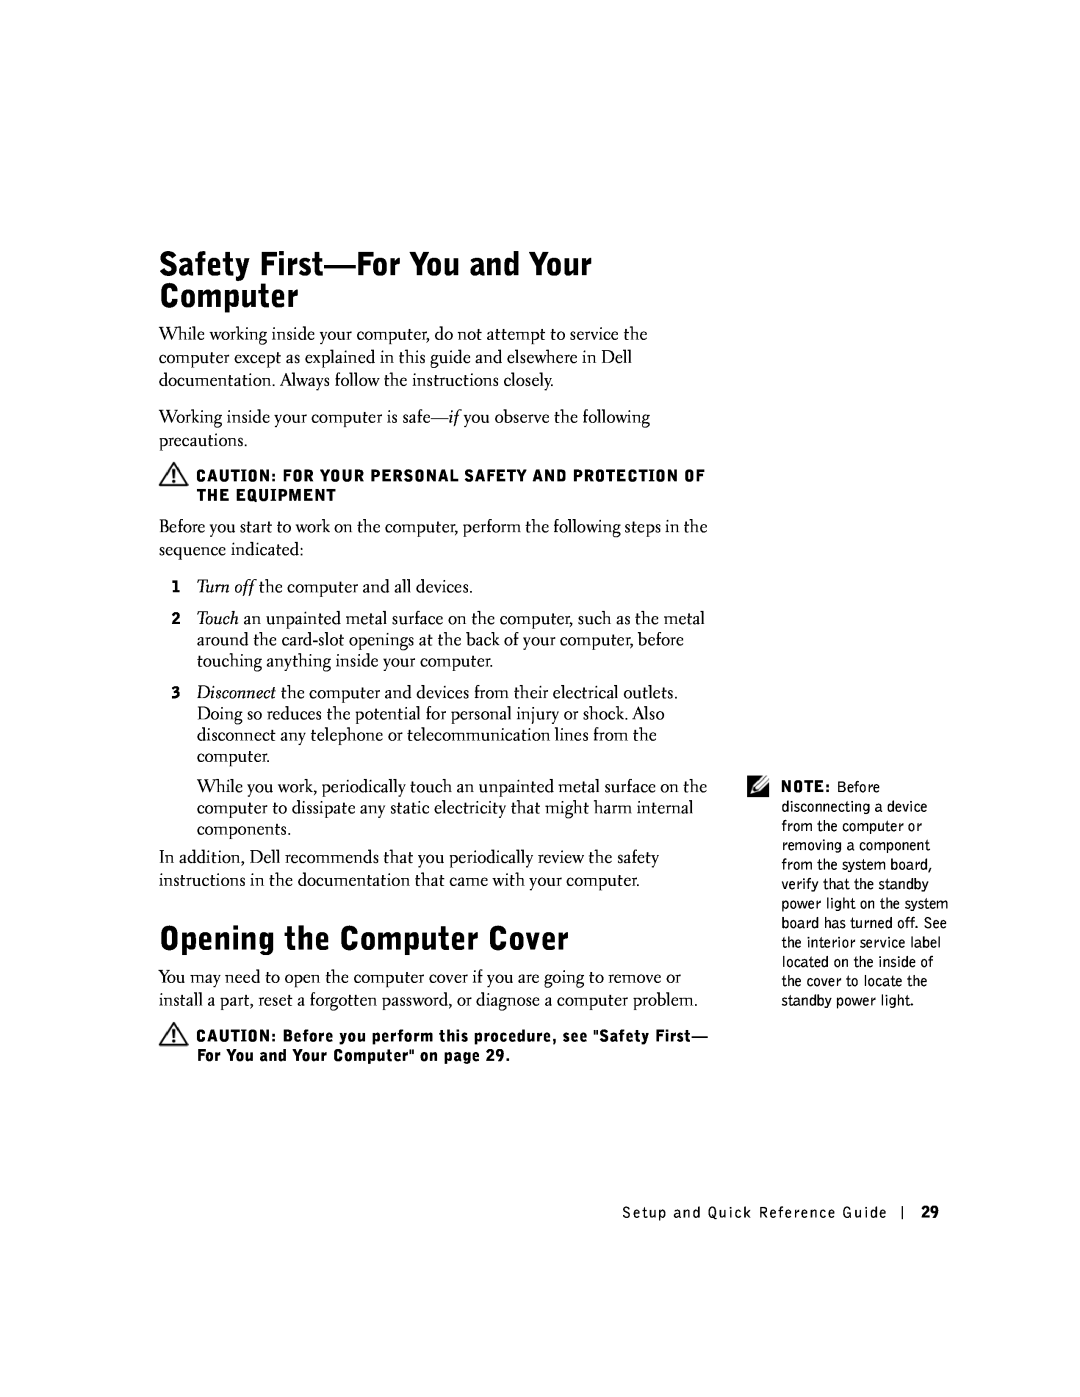 Dell 1G155 manual Safety First-For You and Your Computer, Opening the Computer Cover 